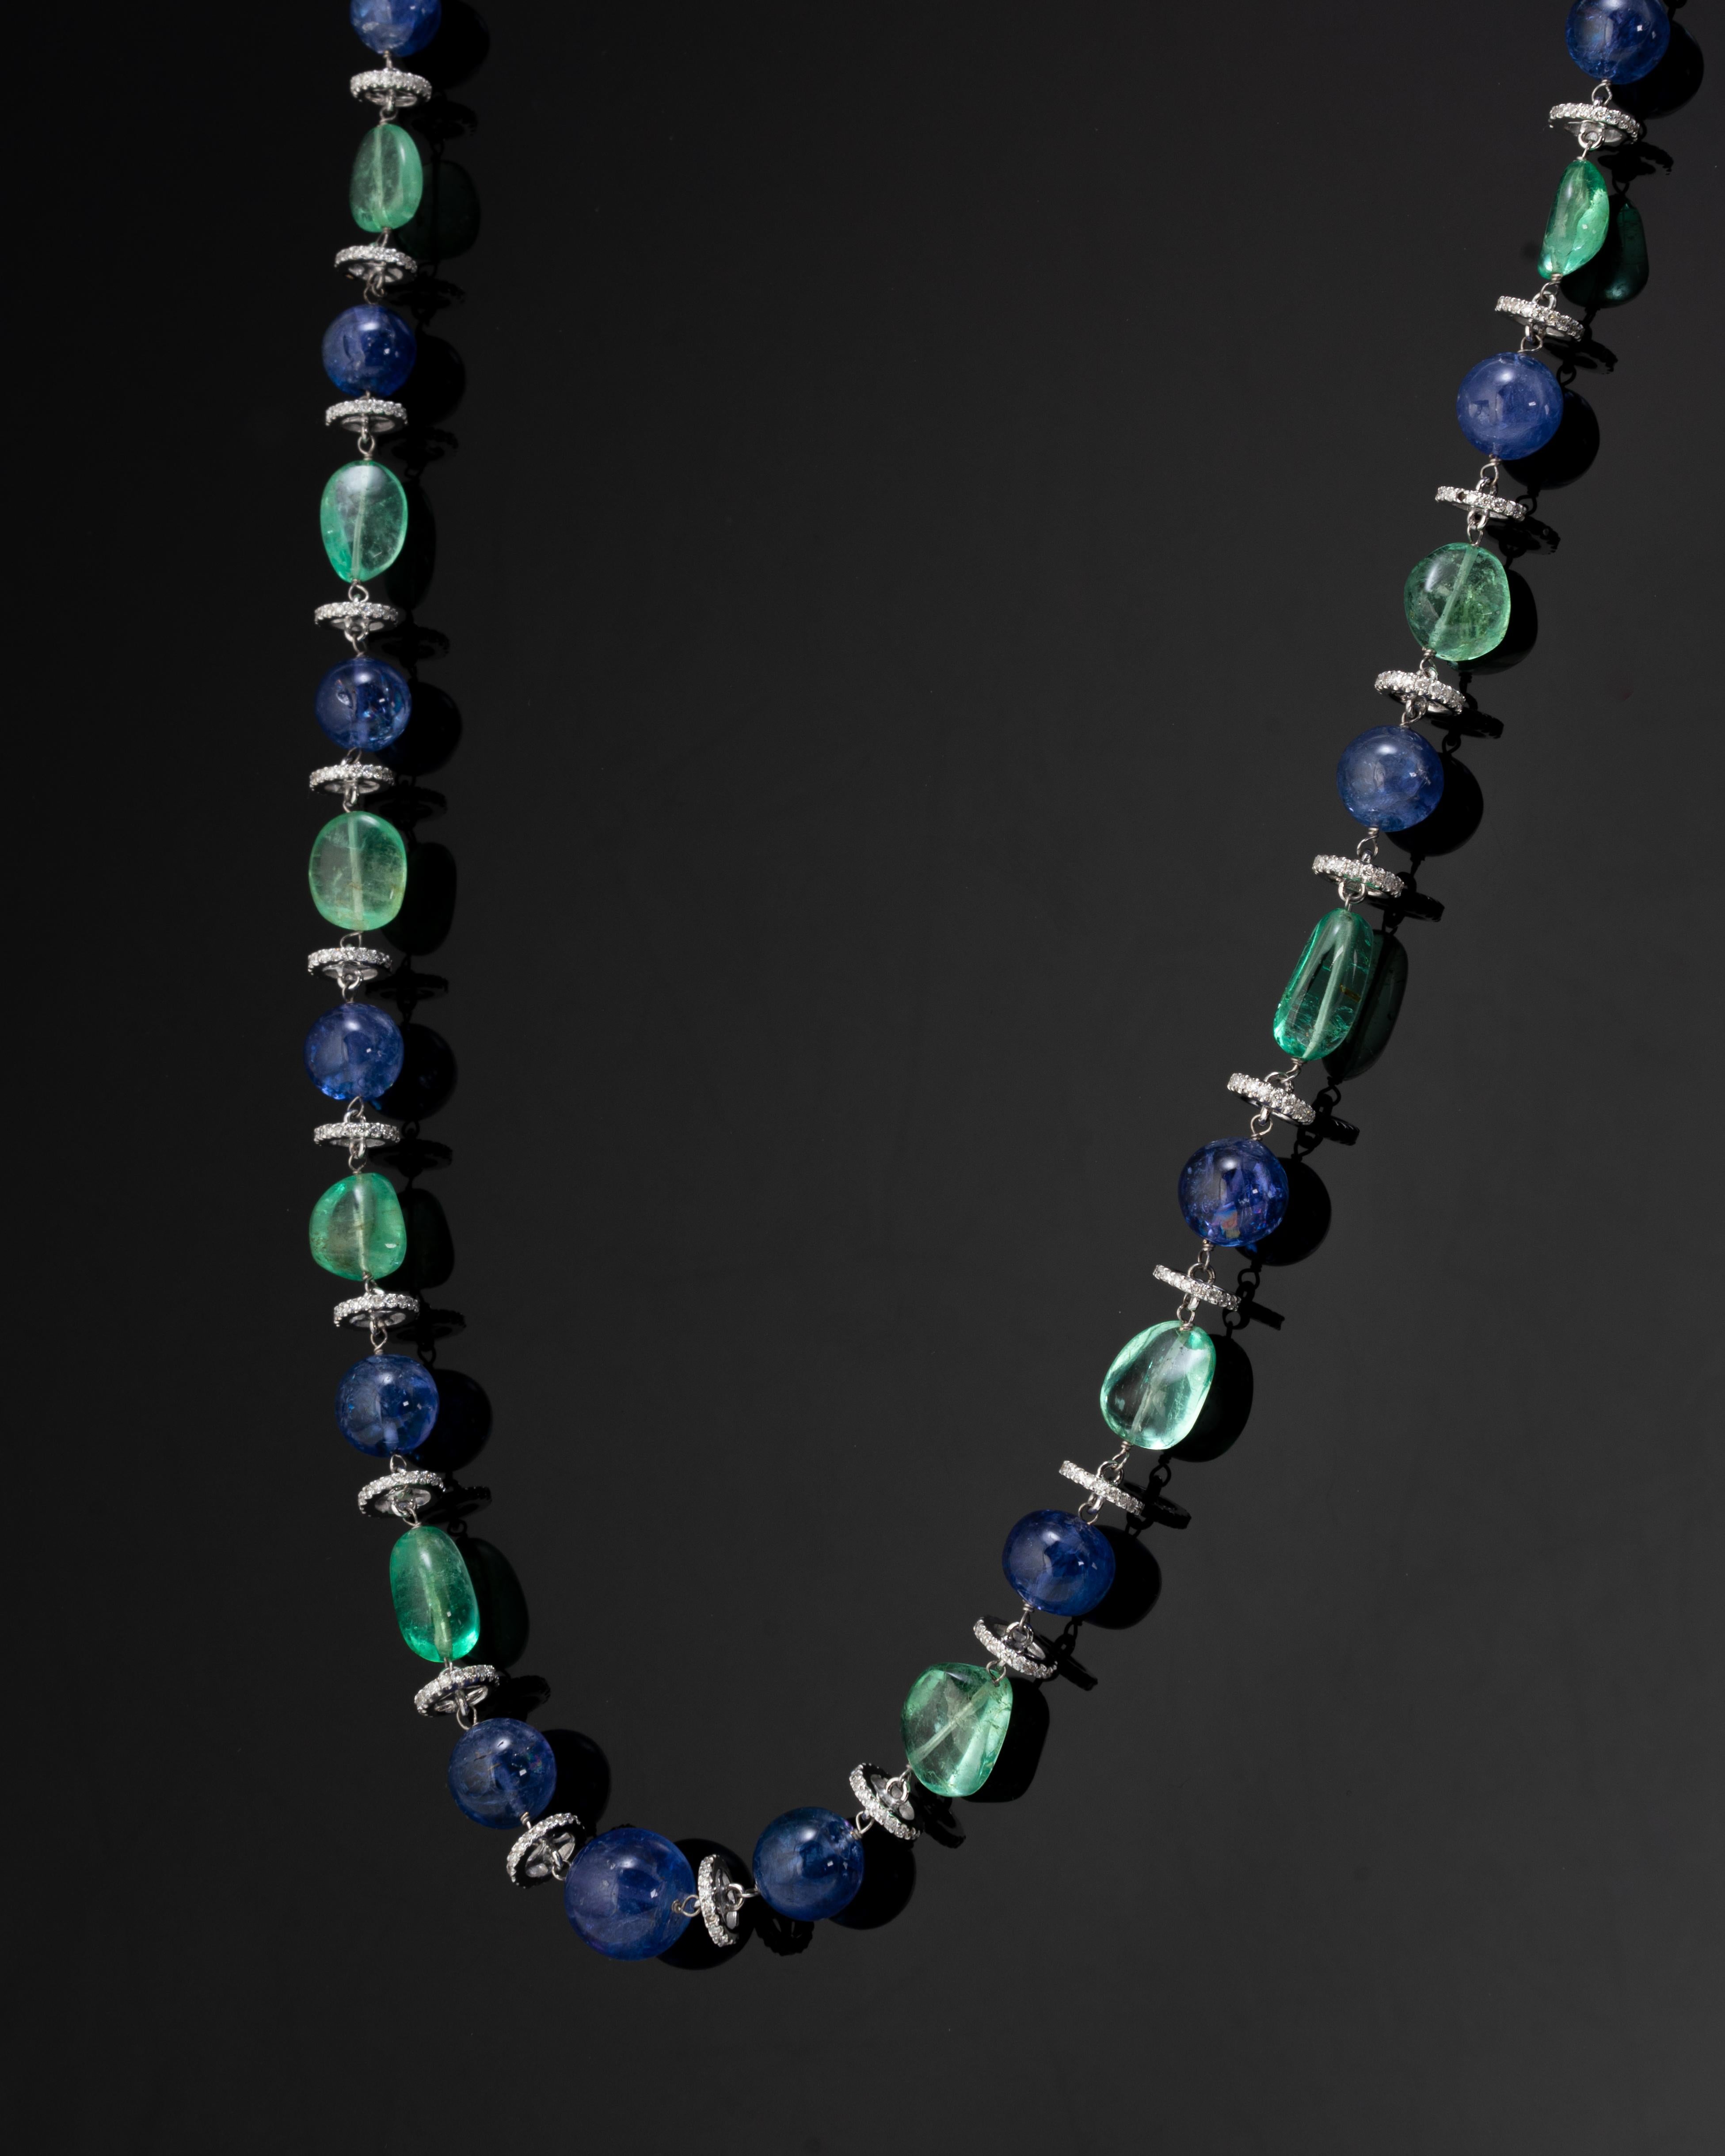 A stunning, art-deco beaded necklace combining Colombian tumble beads and Tanzanite beads with Diamonds. The necklace is around 32 inches long. Please feel free to message us if you have any queries. 
Free shipping provided. Returns accepted.